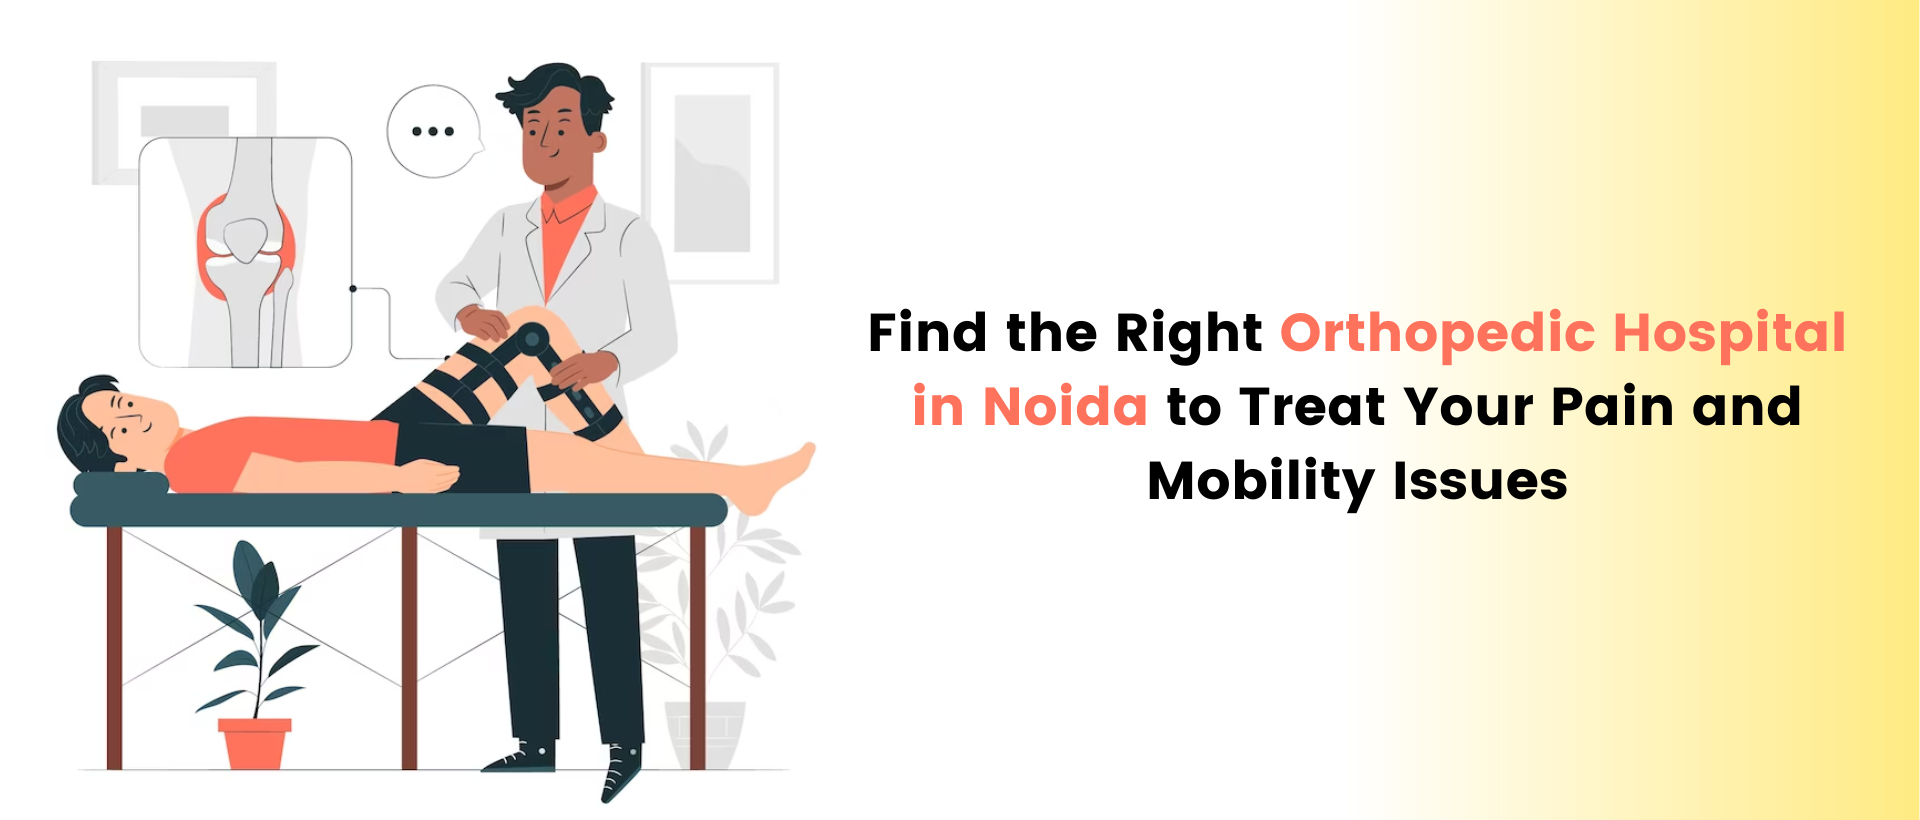 Find the right orthopedic hospital in noida to treat your pain and mobility issues